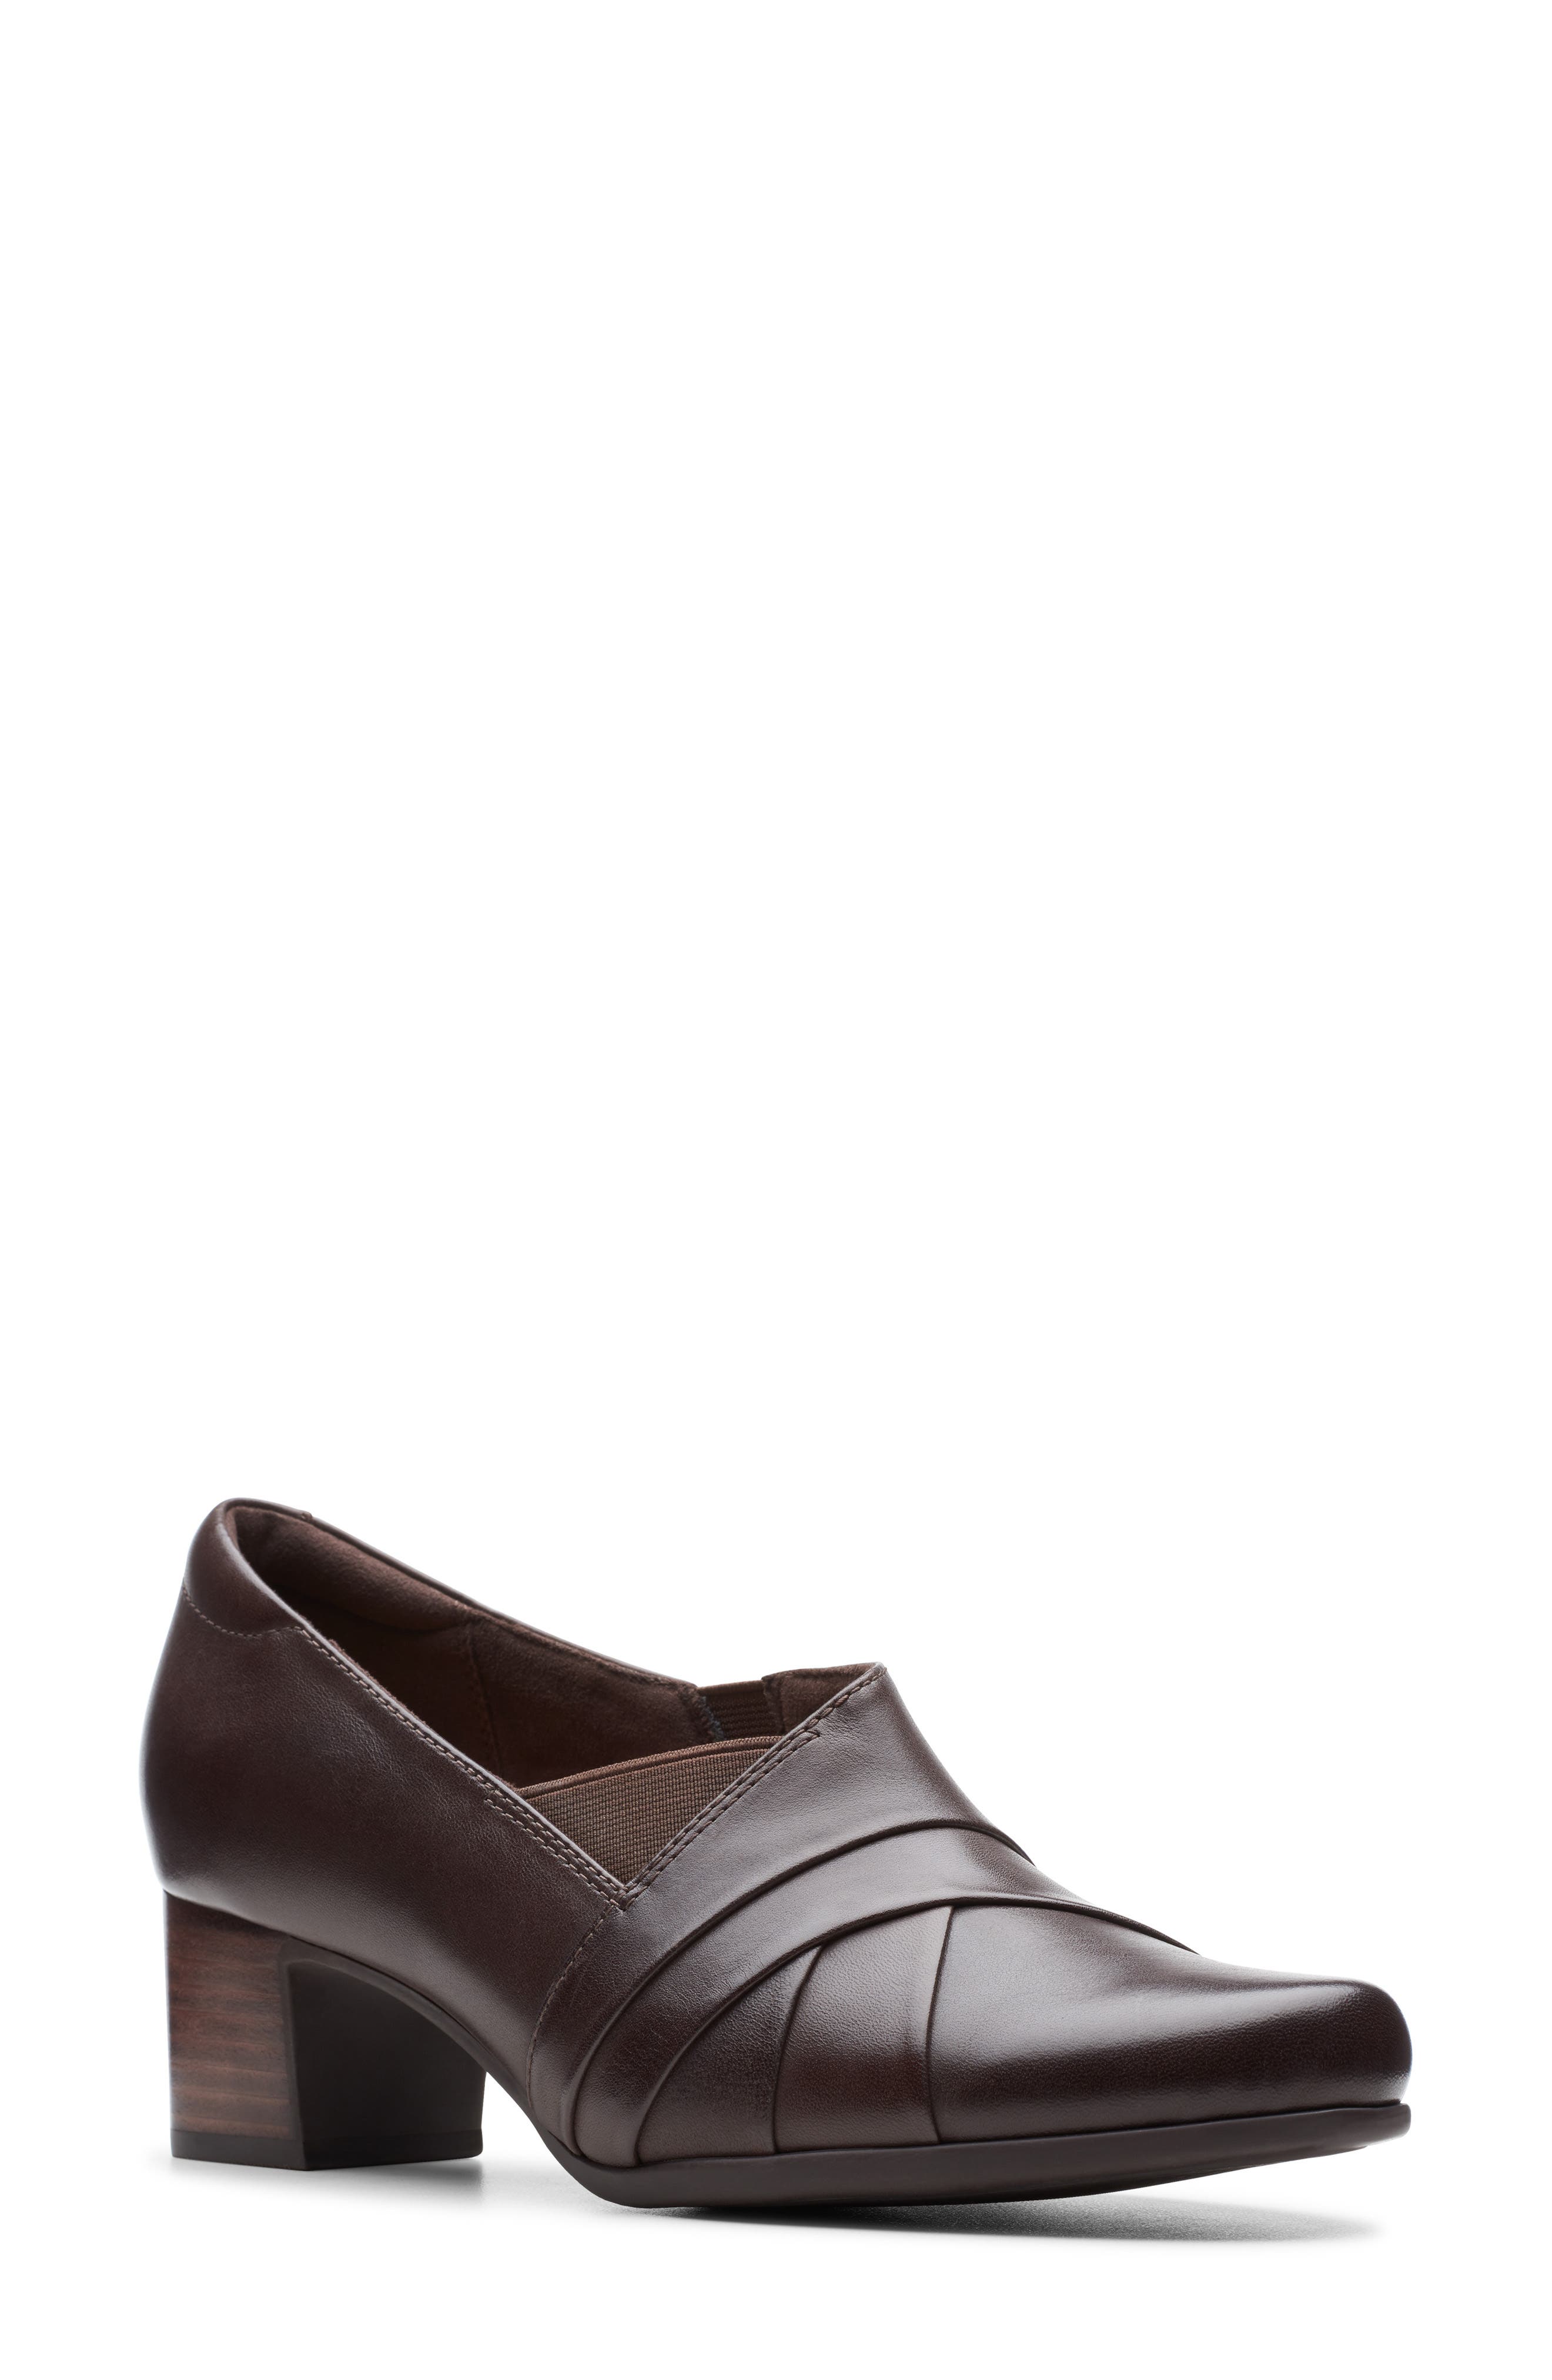 nordstrom clarks womens shoes